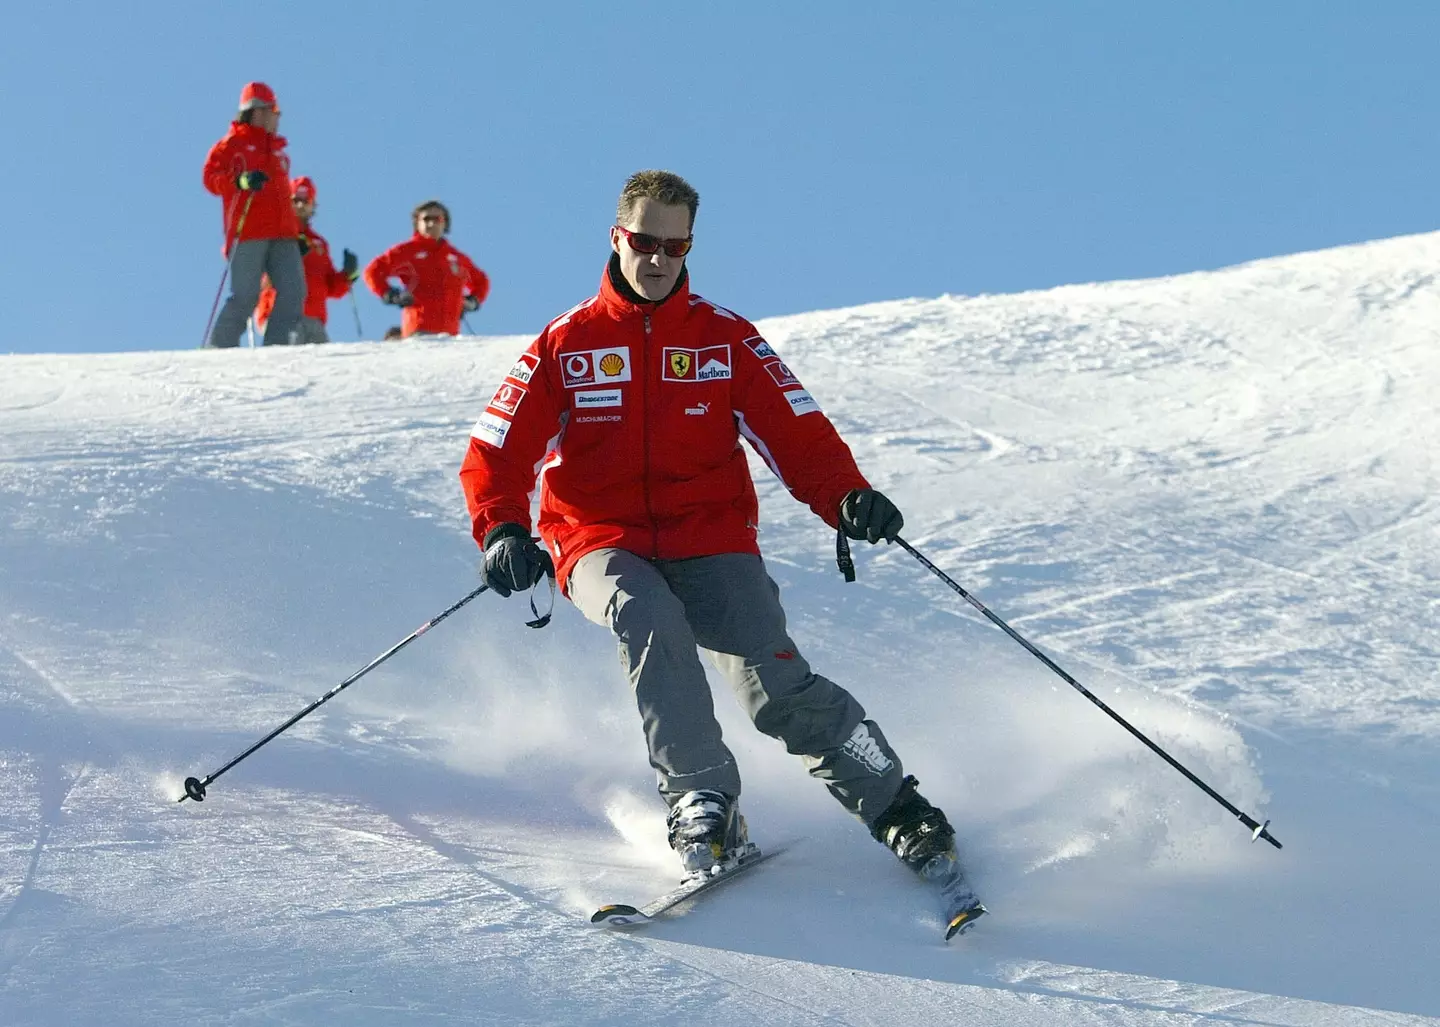 Schumacher suffered life-changing injuries after he fell while skiing 10 years ago.